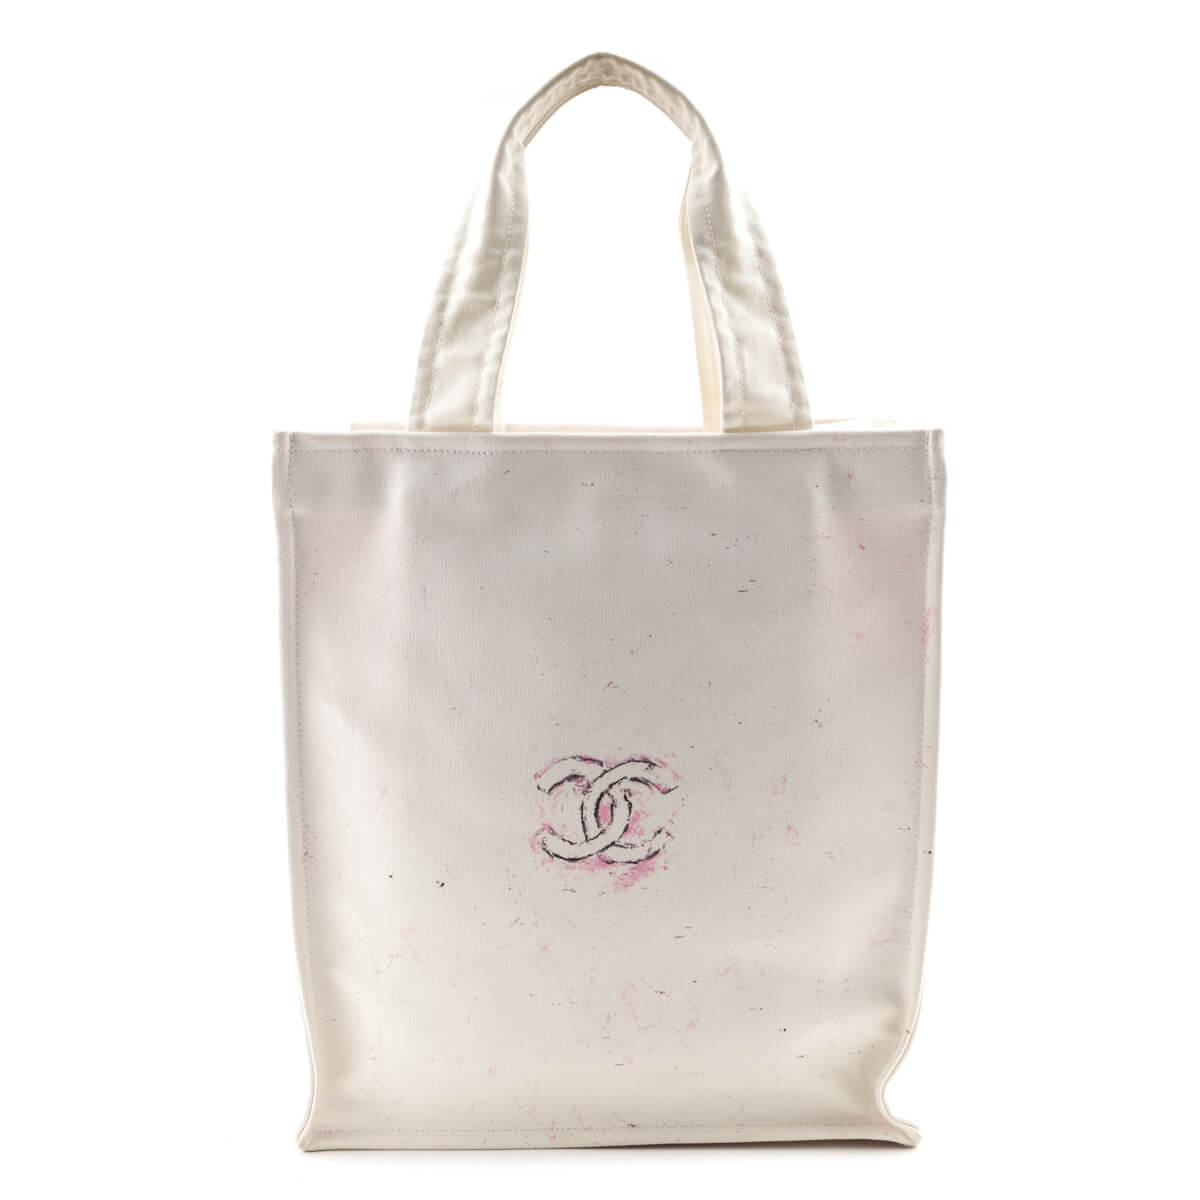 Sold at Auction: Chanel Miami Cruise Tote Bag